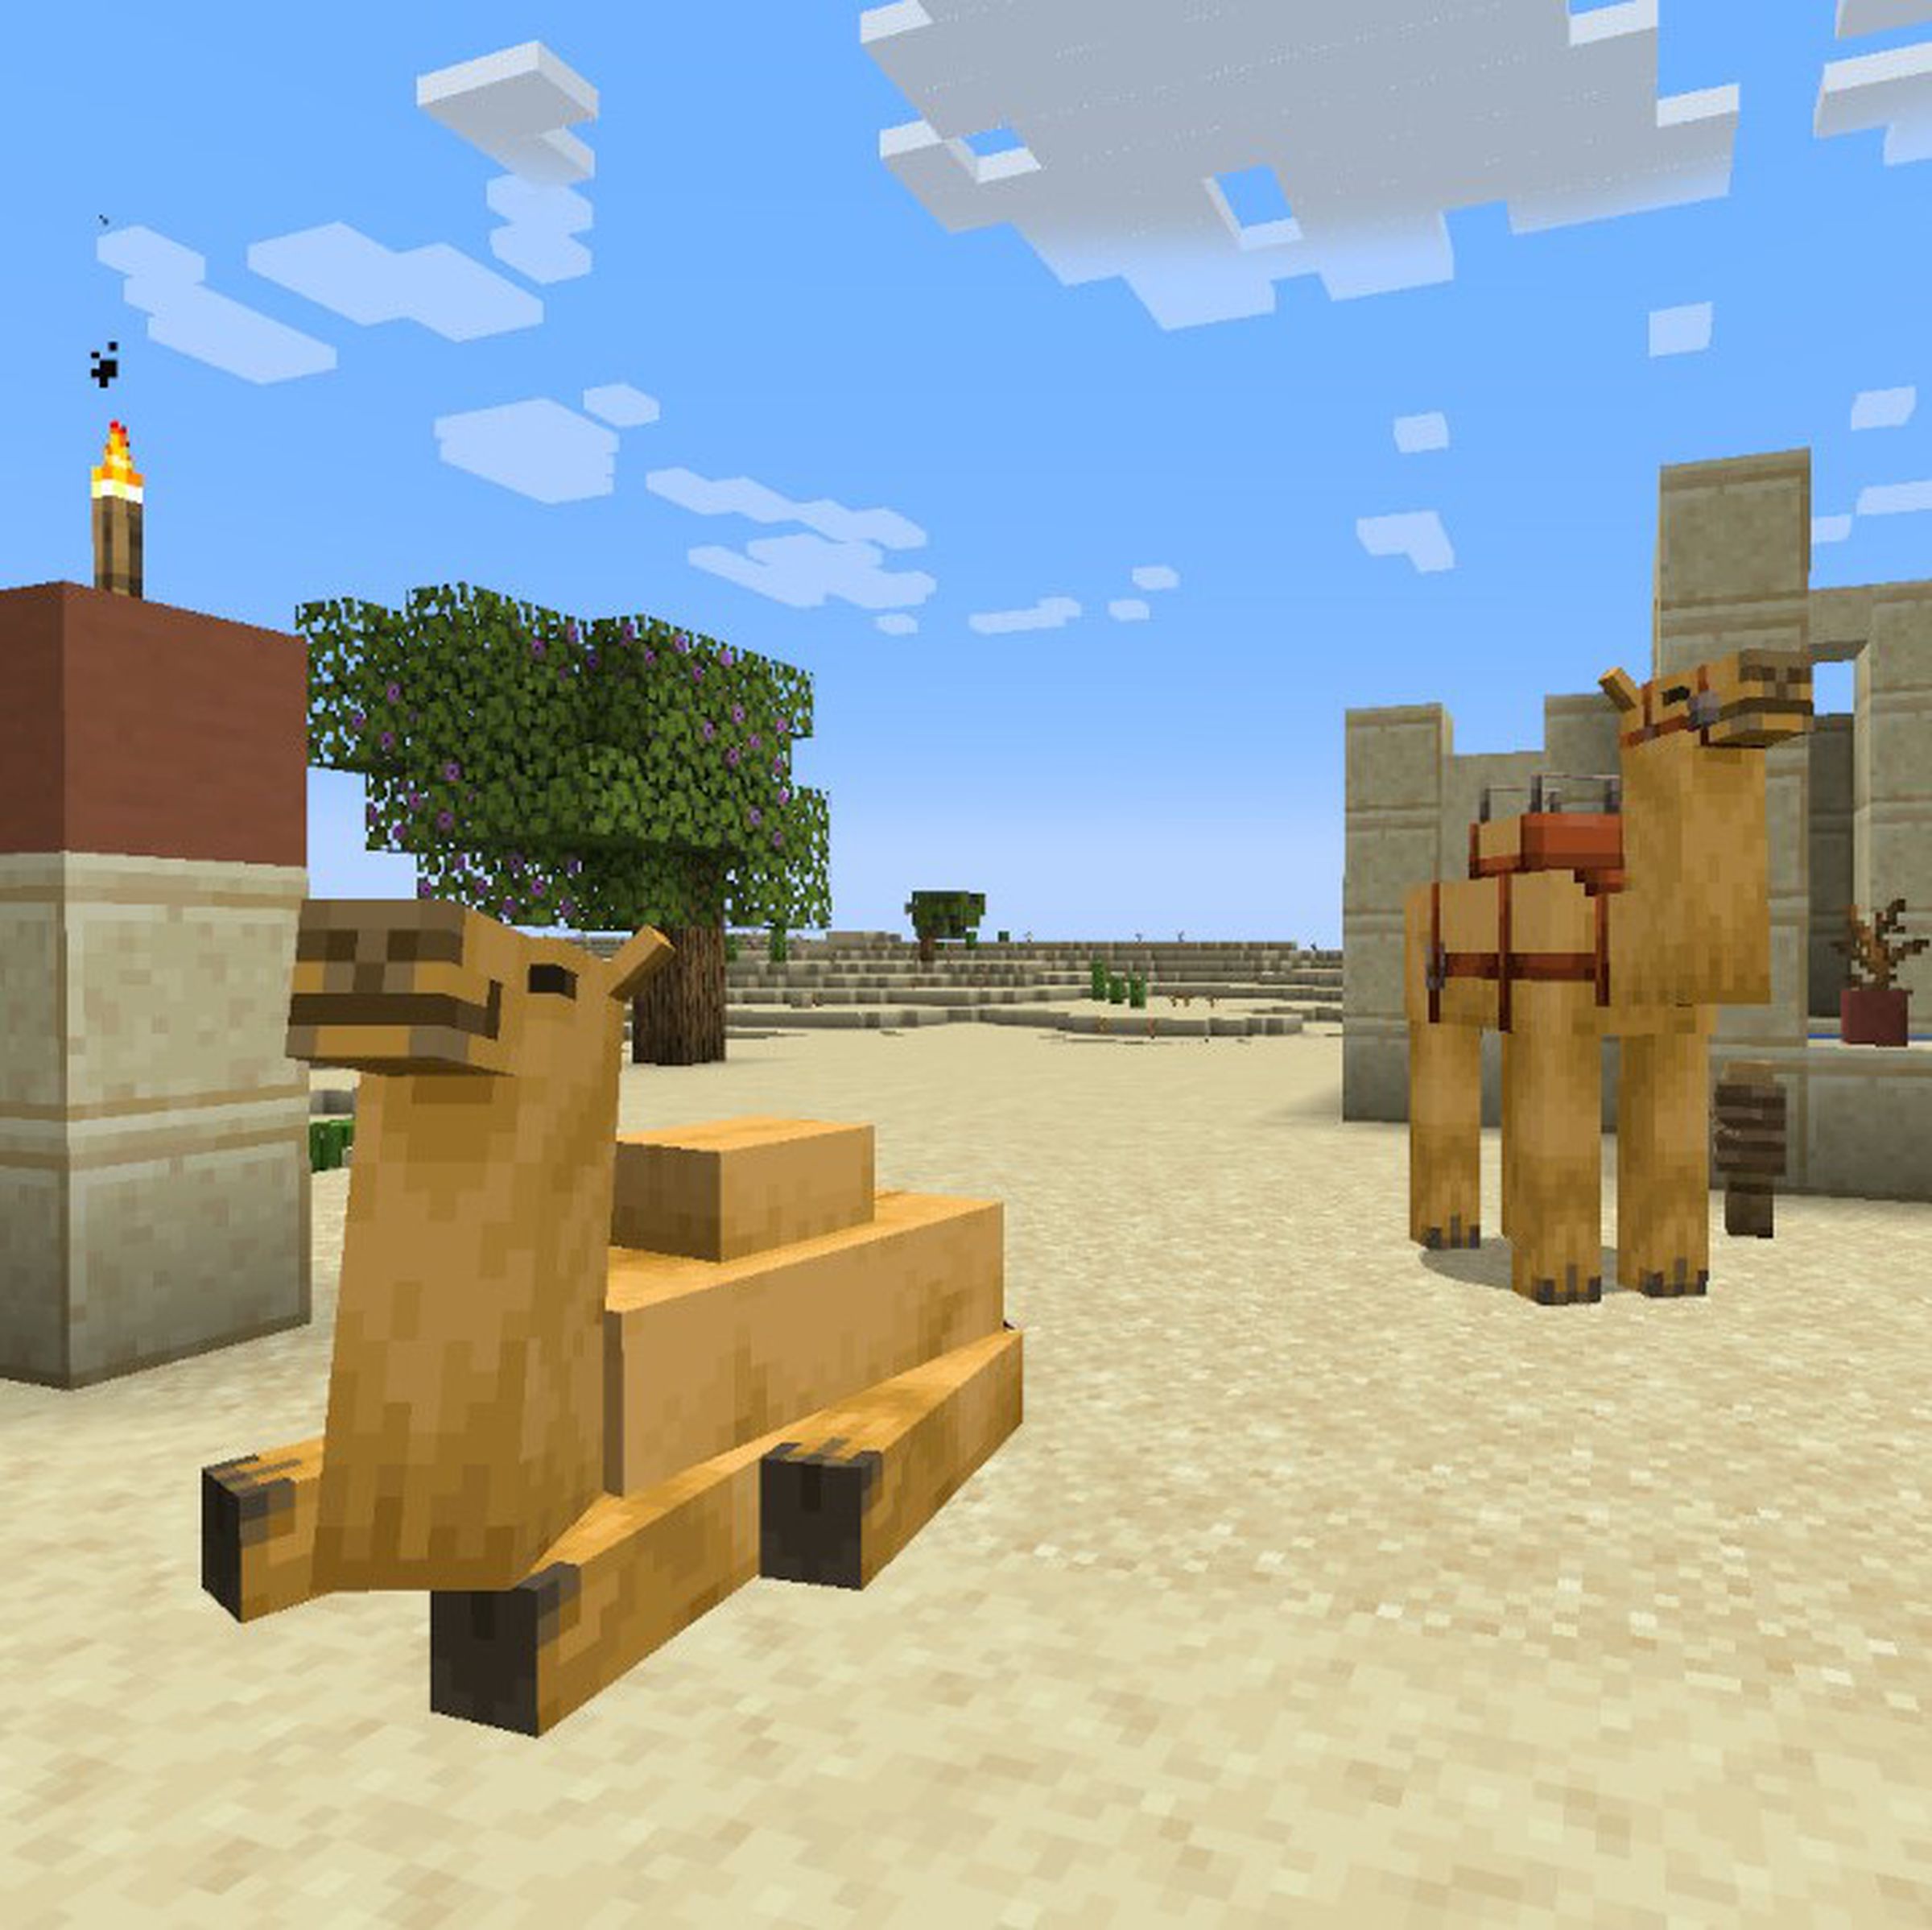 A screenshot of camels in an upcoming Minecraft update.